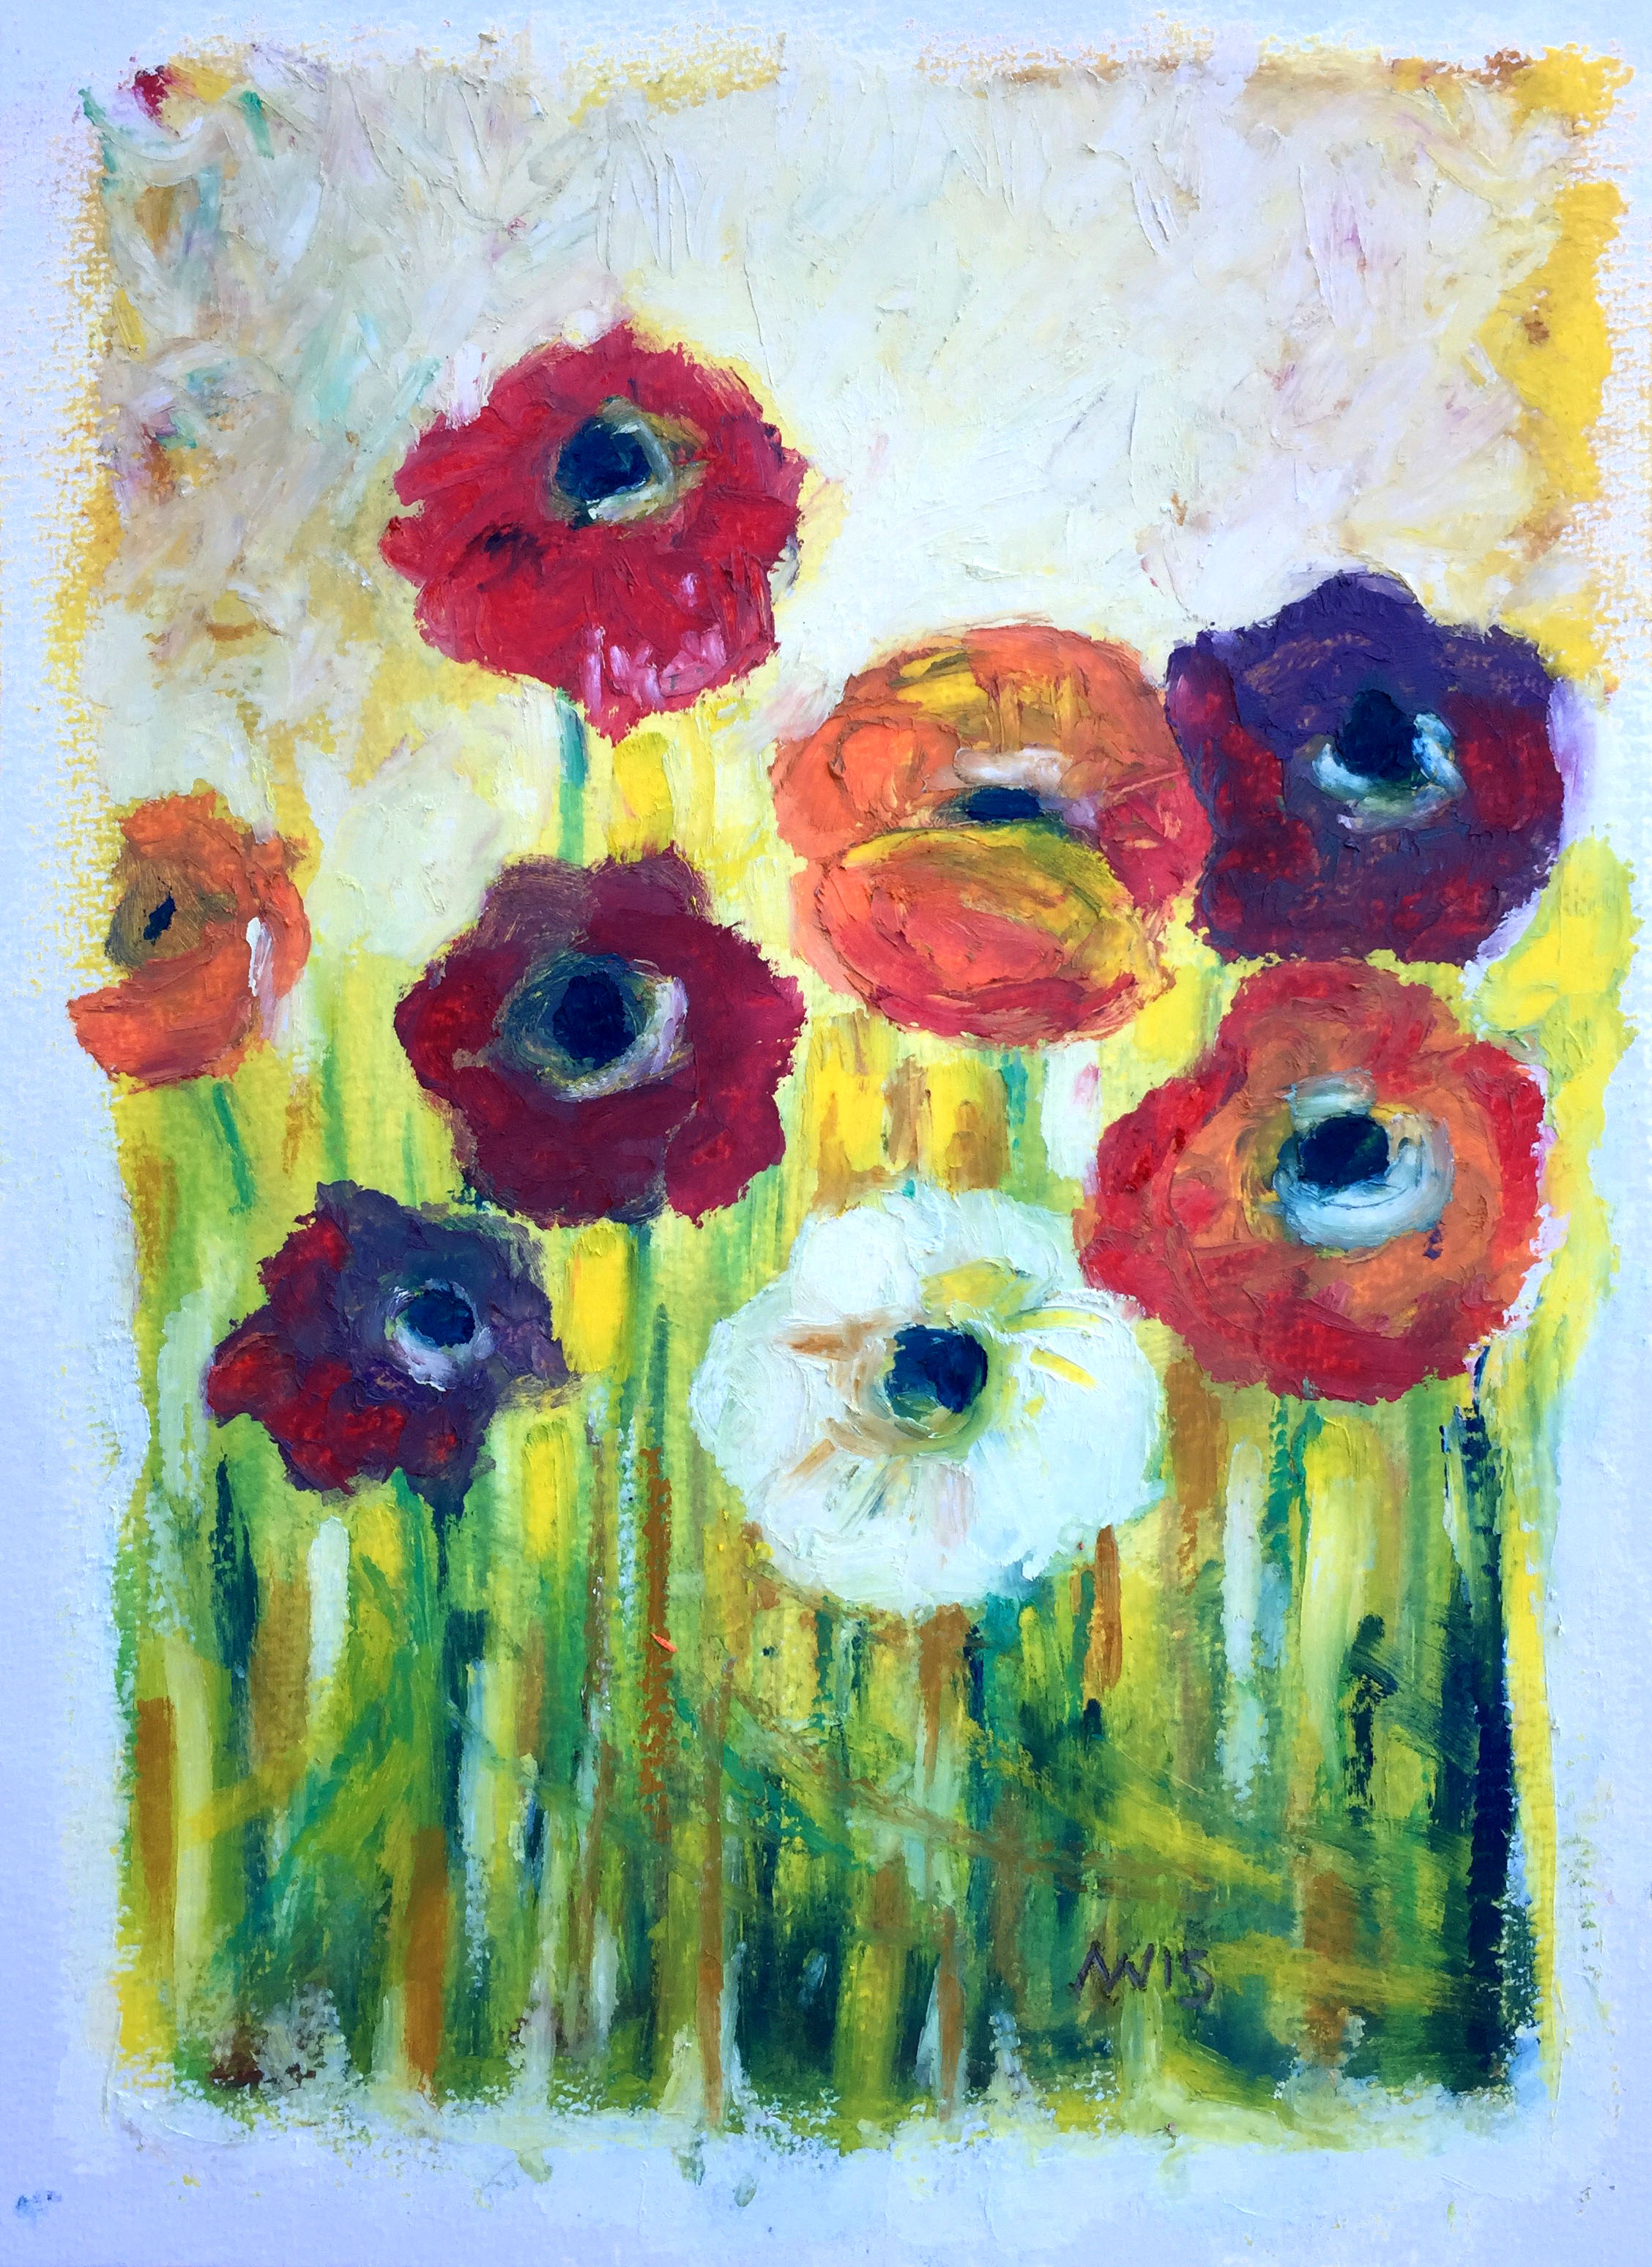 Painting Flowers with Oil Paint Sticks 